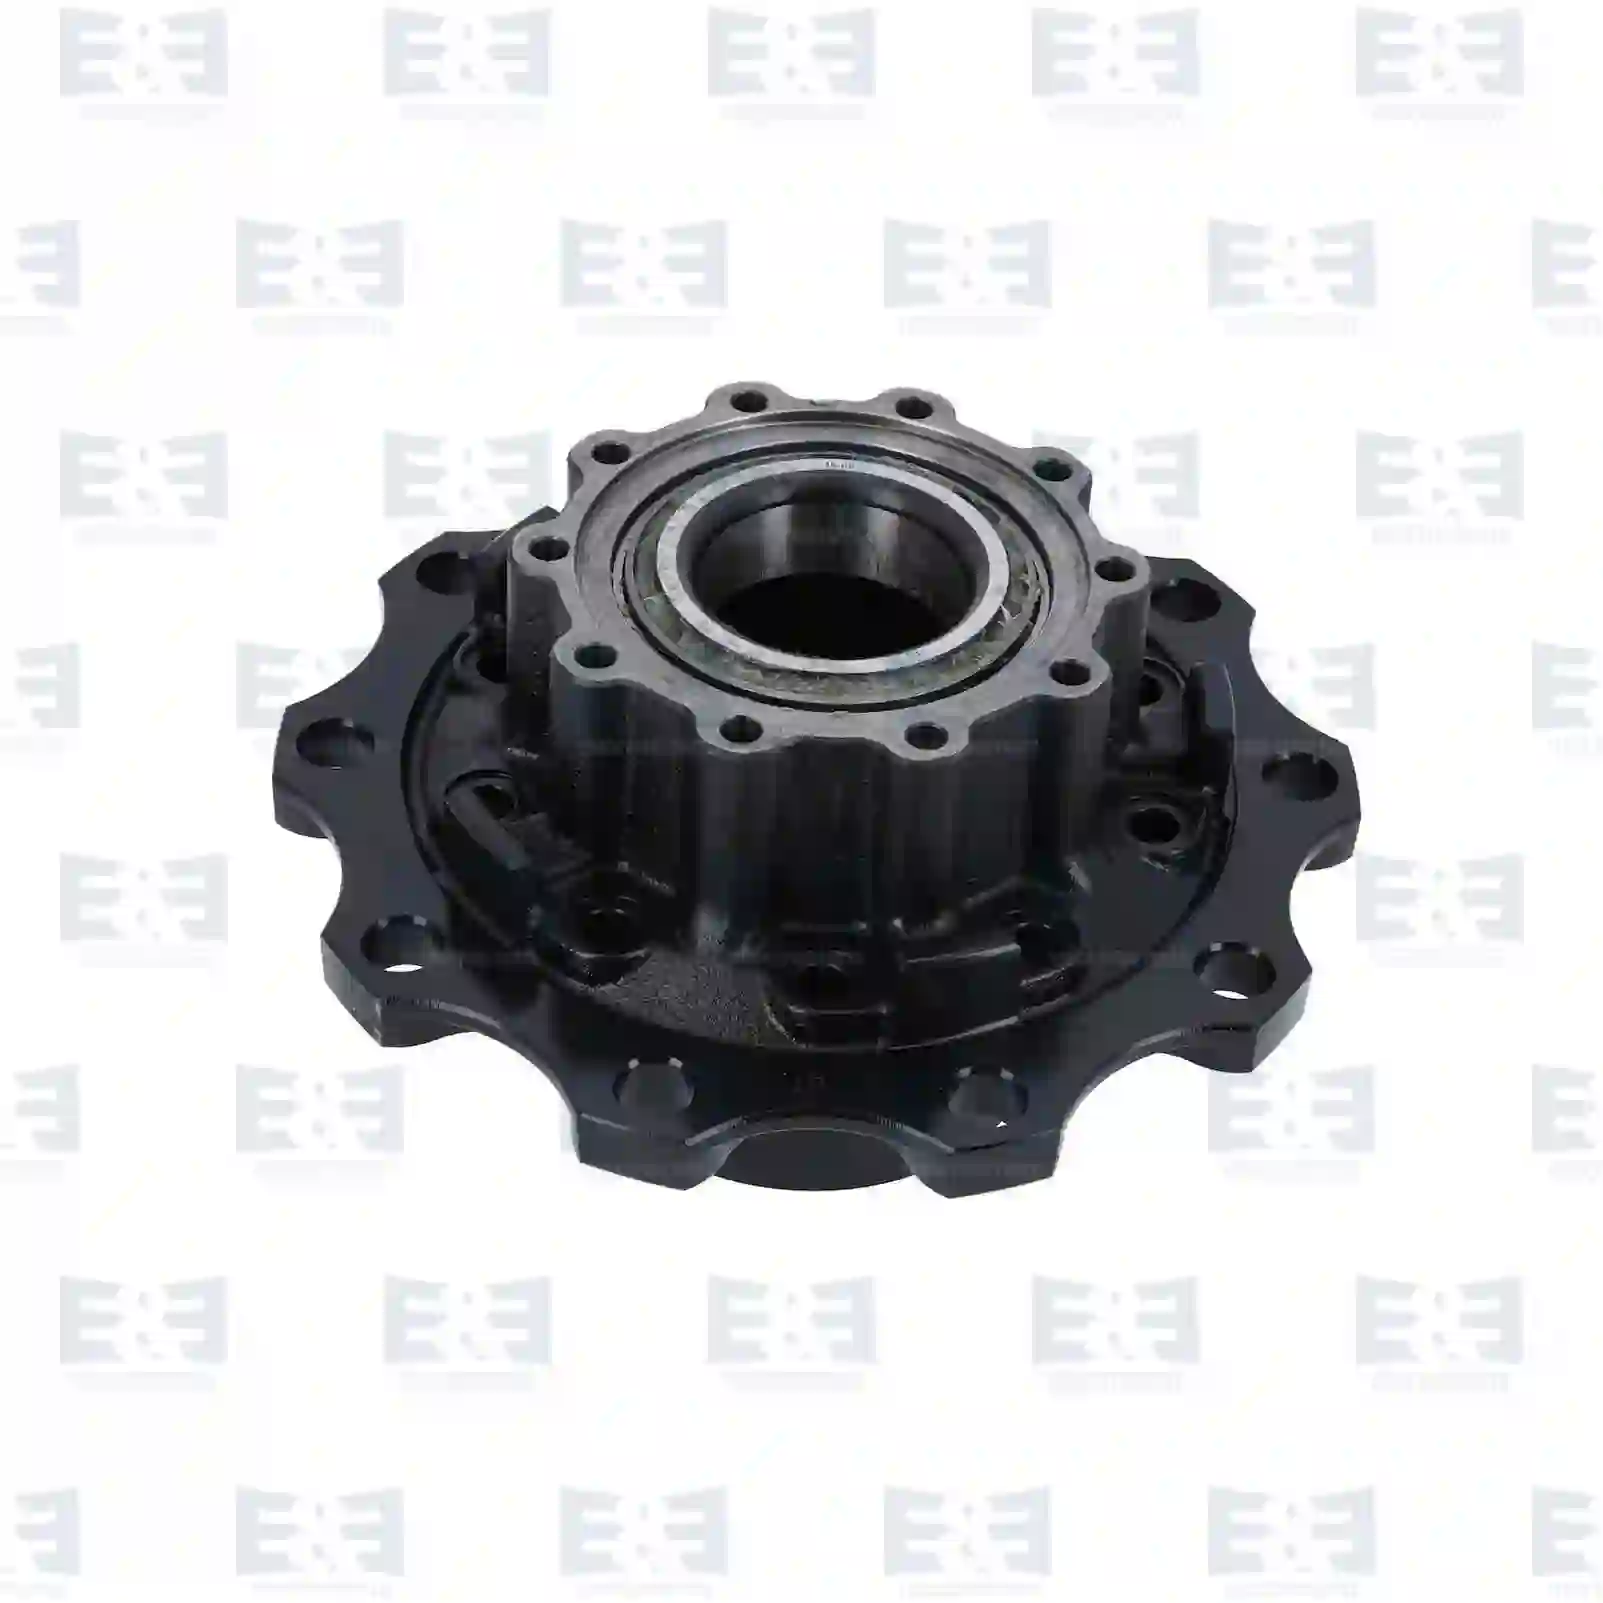 Wheel hub, with bearing, without ABS ring, 2E2284166, 1800283S, 2290542S, ZG30215-0008, , , , ||  2E2284166 E&E Truck Spare Parts | Truck Spare Parts, Auotomotive Spare Parts Wheel hub, with bearing, without ABS ring, 2E2284166, 1800283S, 2290542S, ZG30215-0008, , , , ||  2E2284166 E&E Truck Spare Parts | Truck Spare Parts, Auotomotive Spare Parts